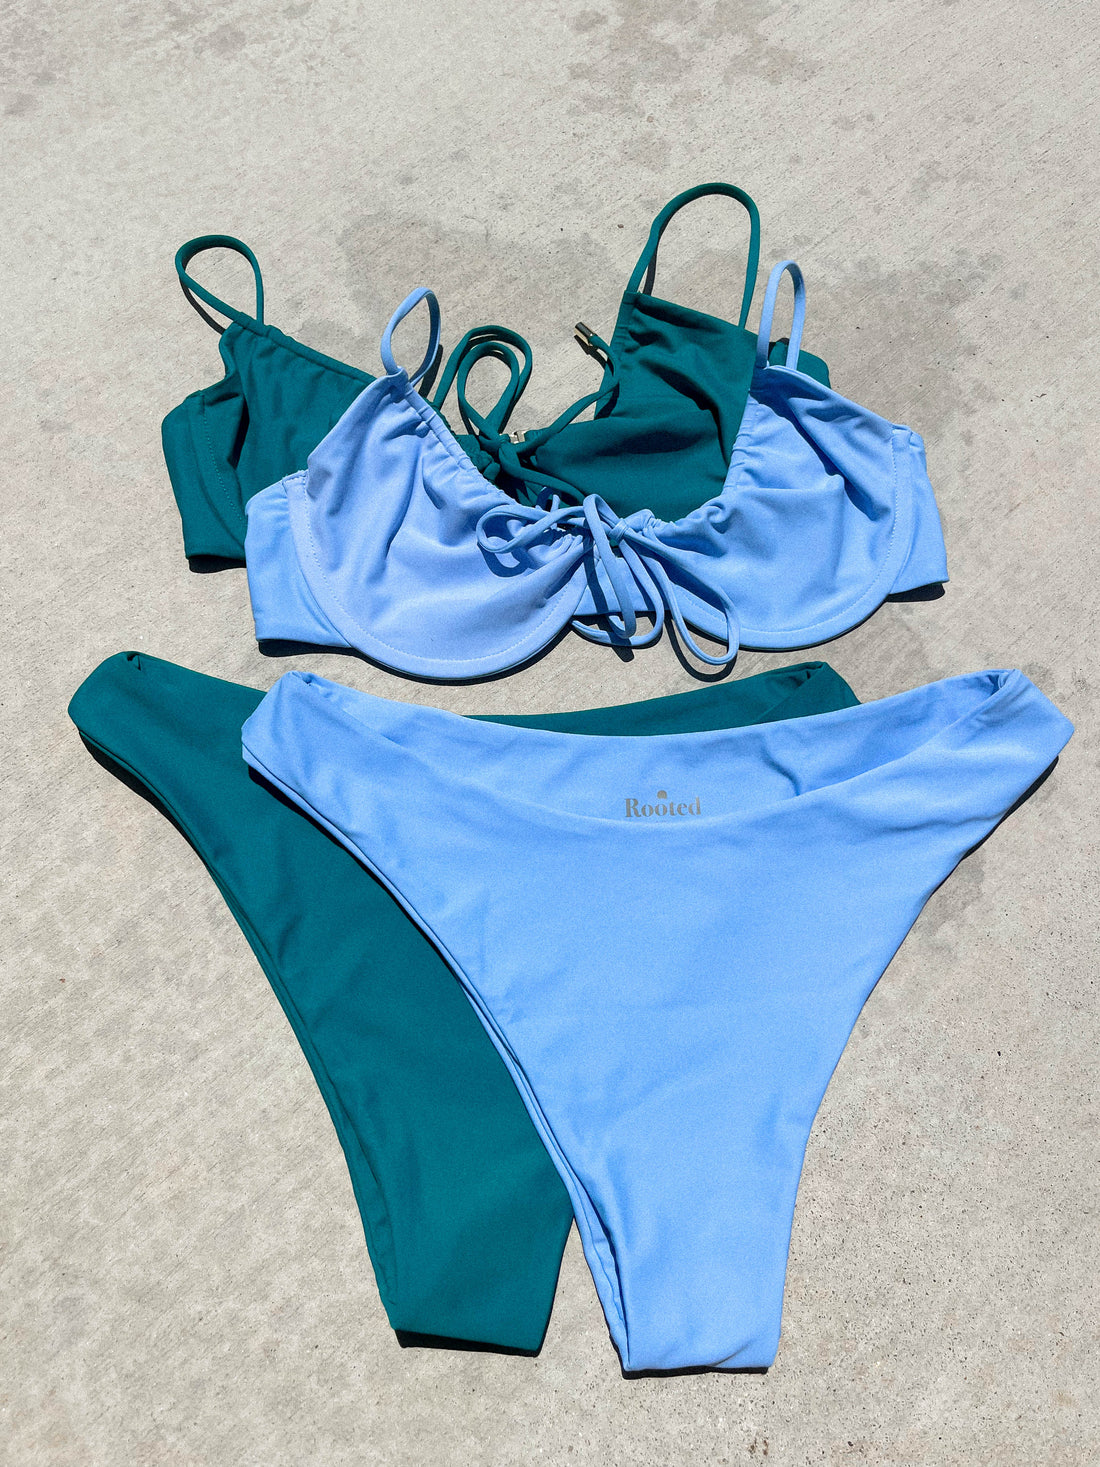  Best selling bikini - comfortable and sustainable rooted swim